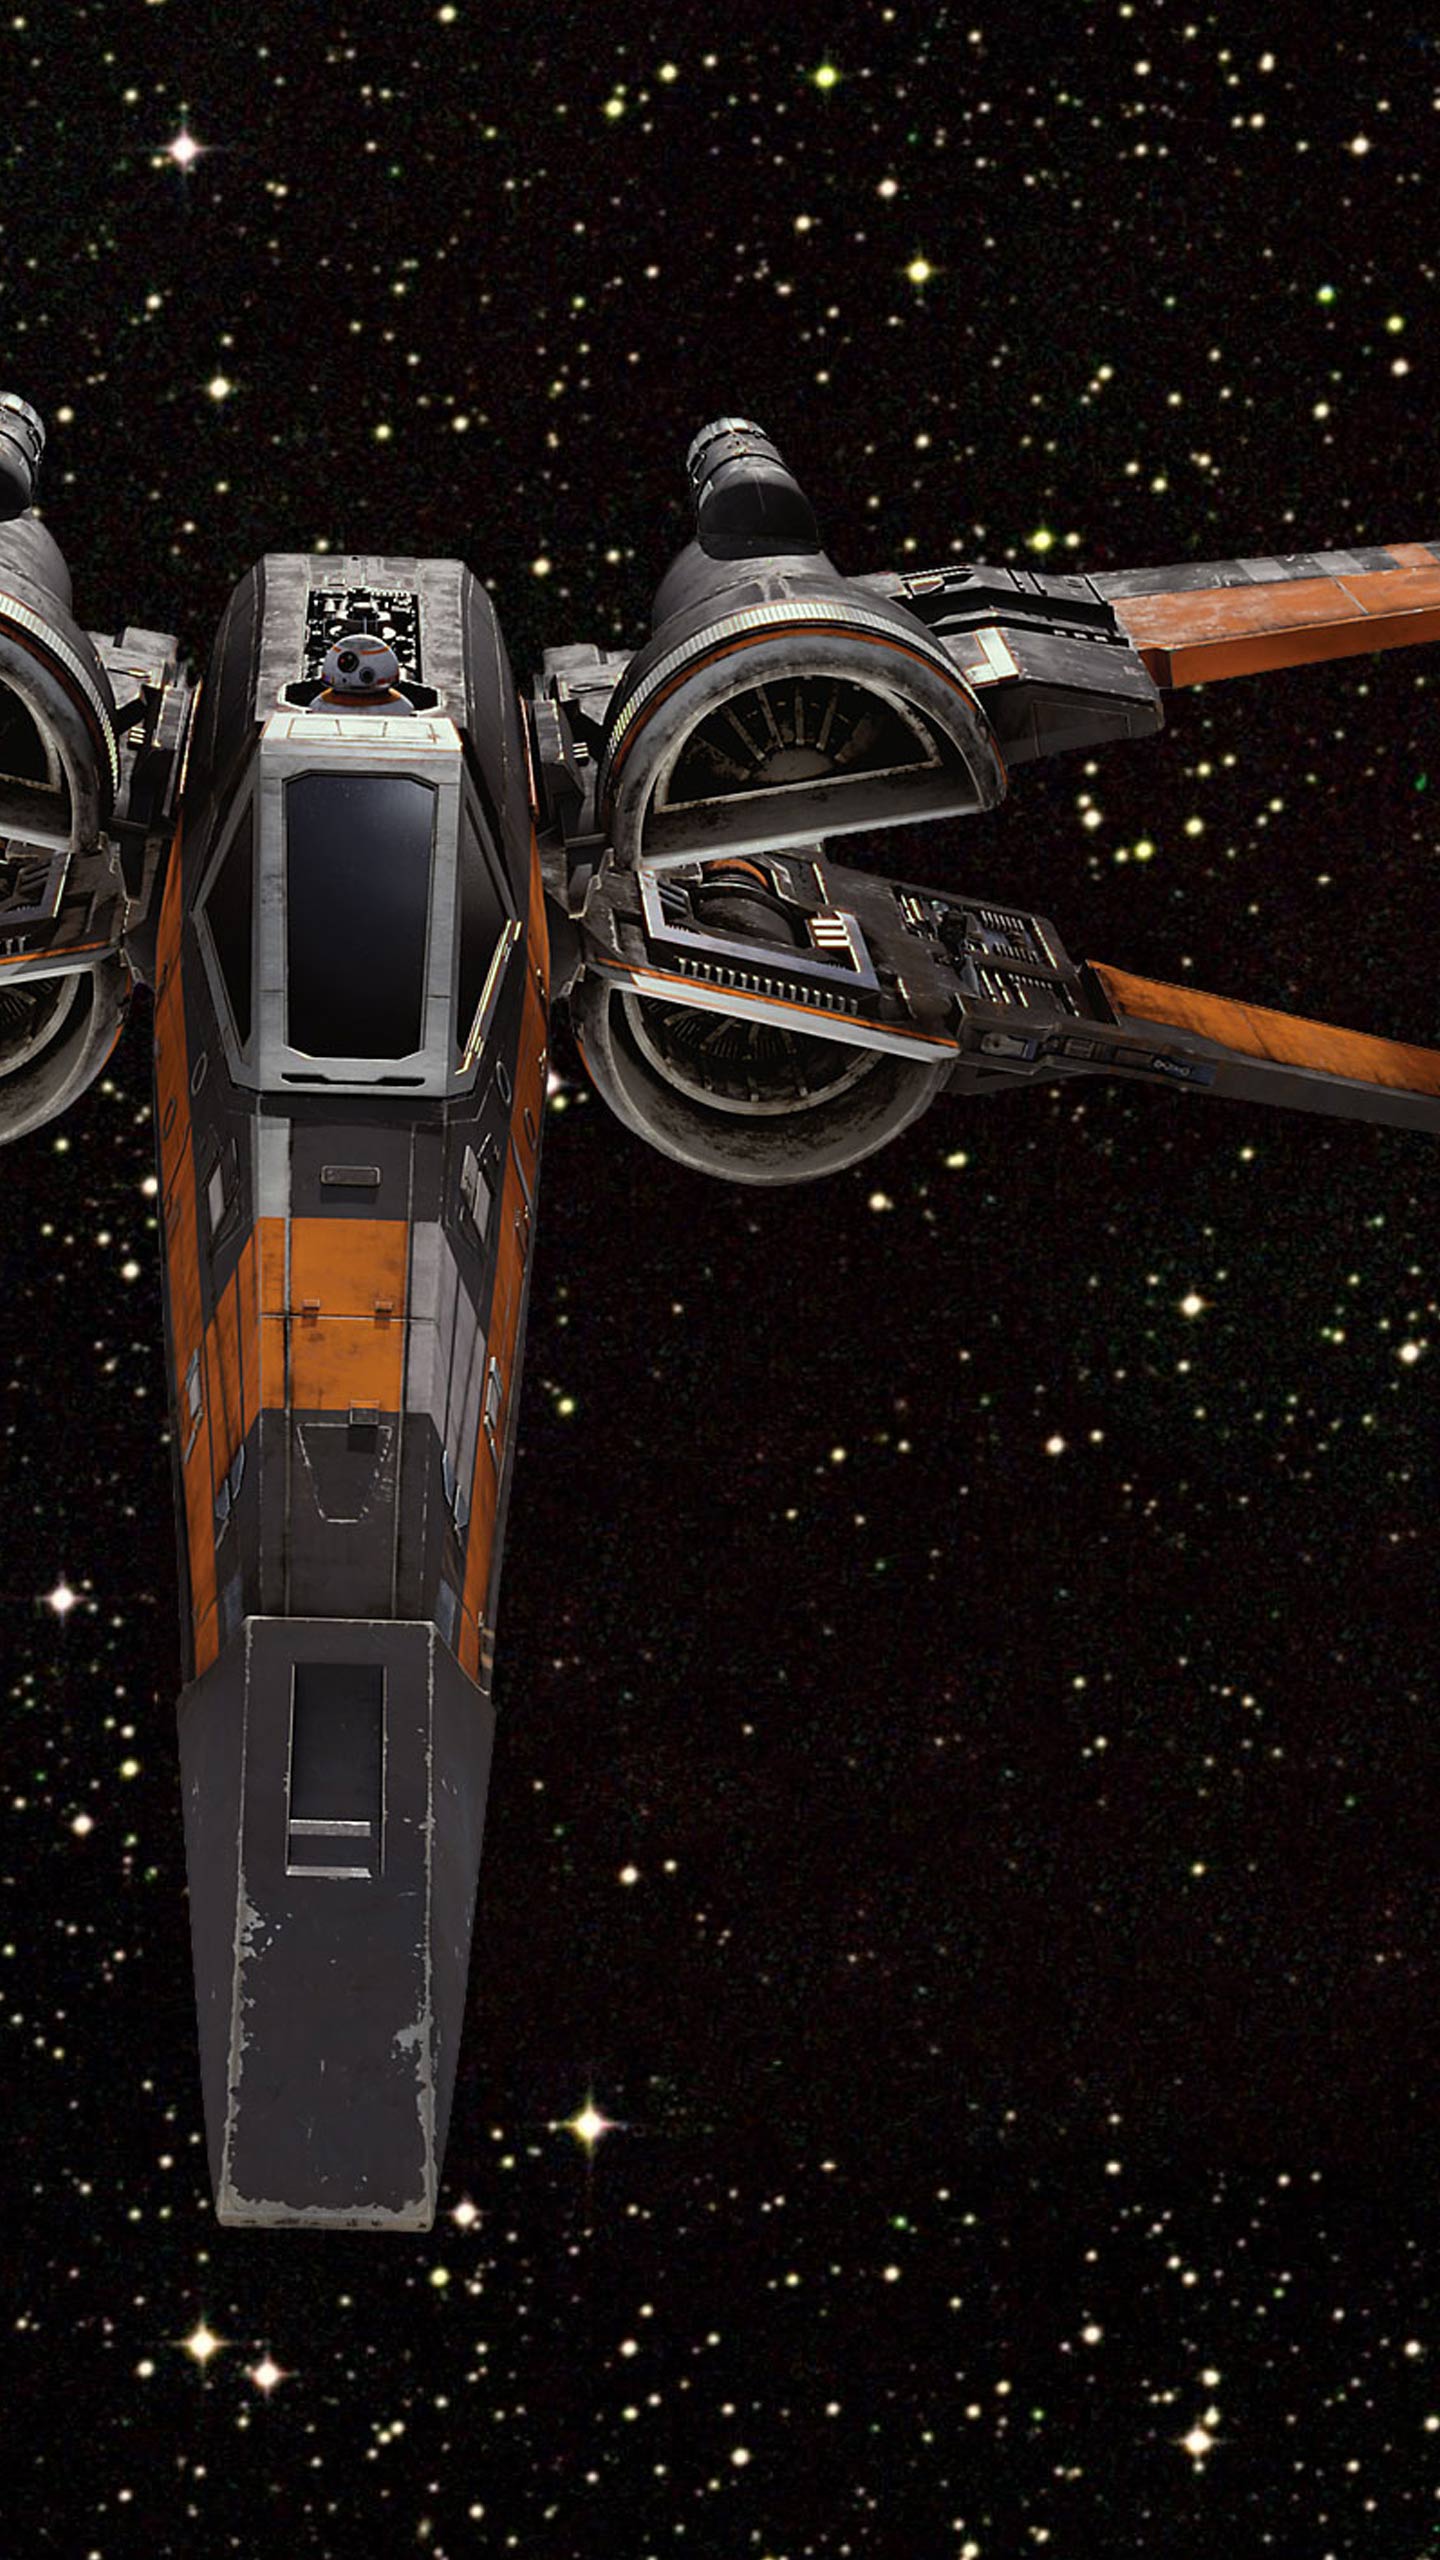 Star Wars The Force Awakens Wallpapers For Your Iphone 6s